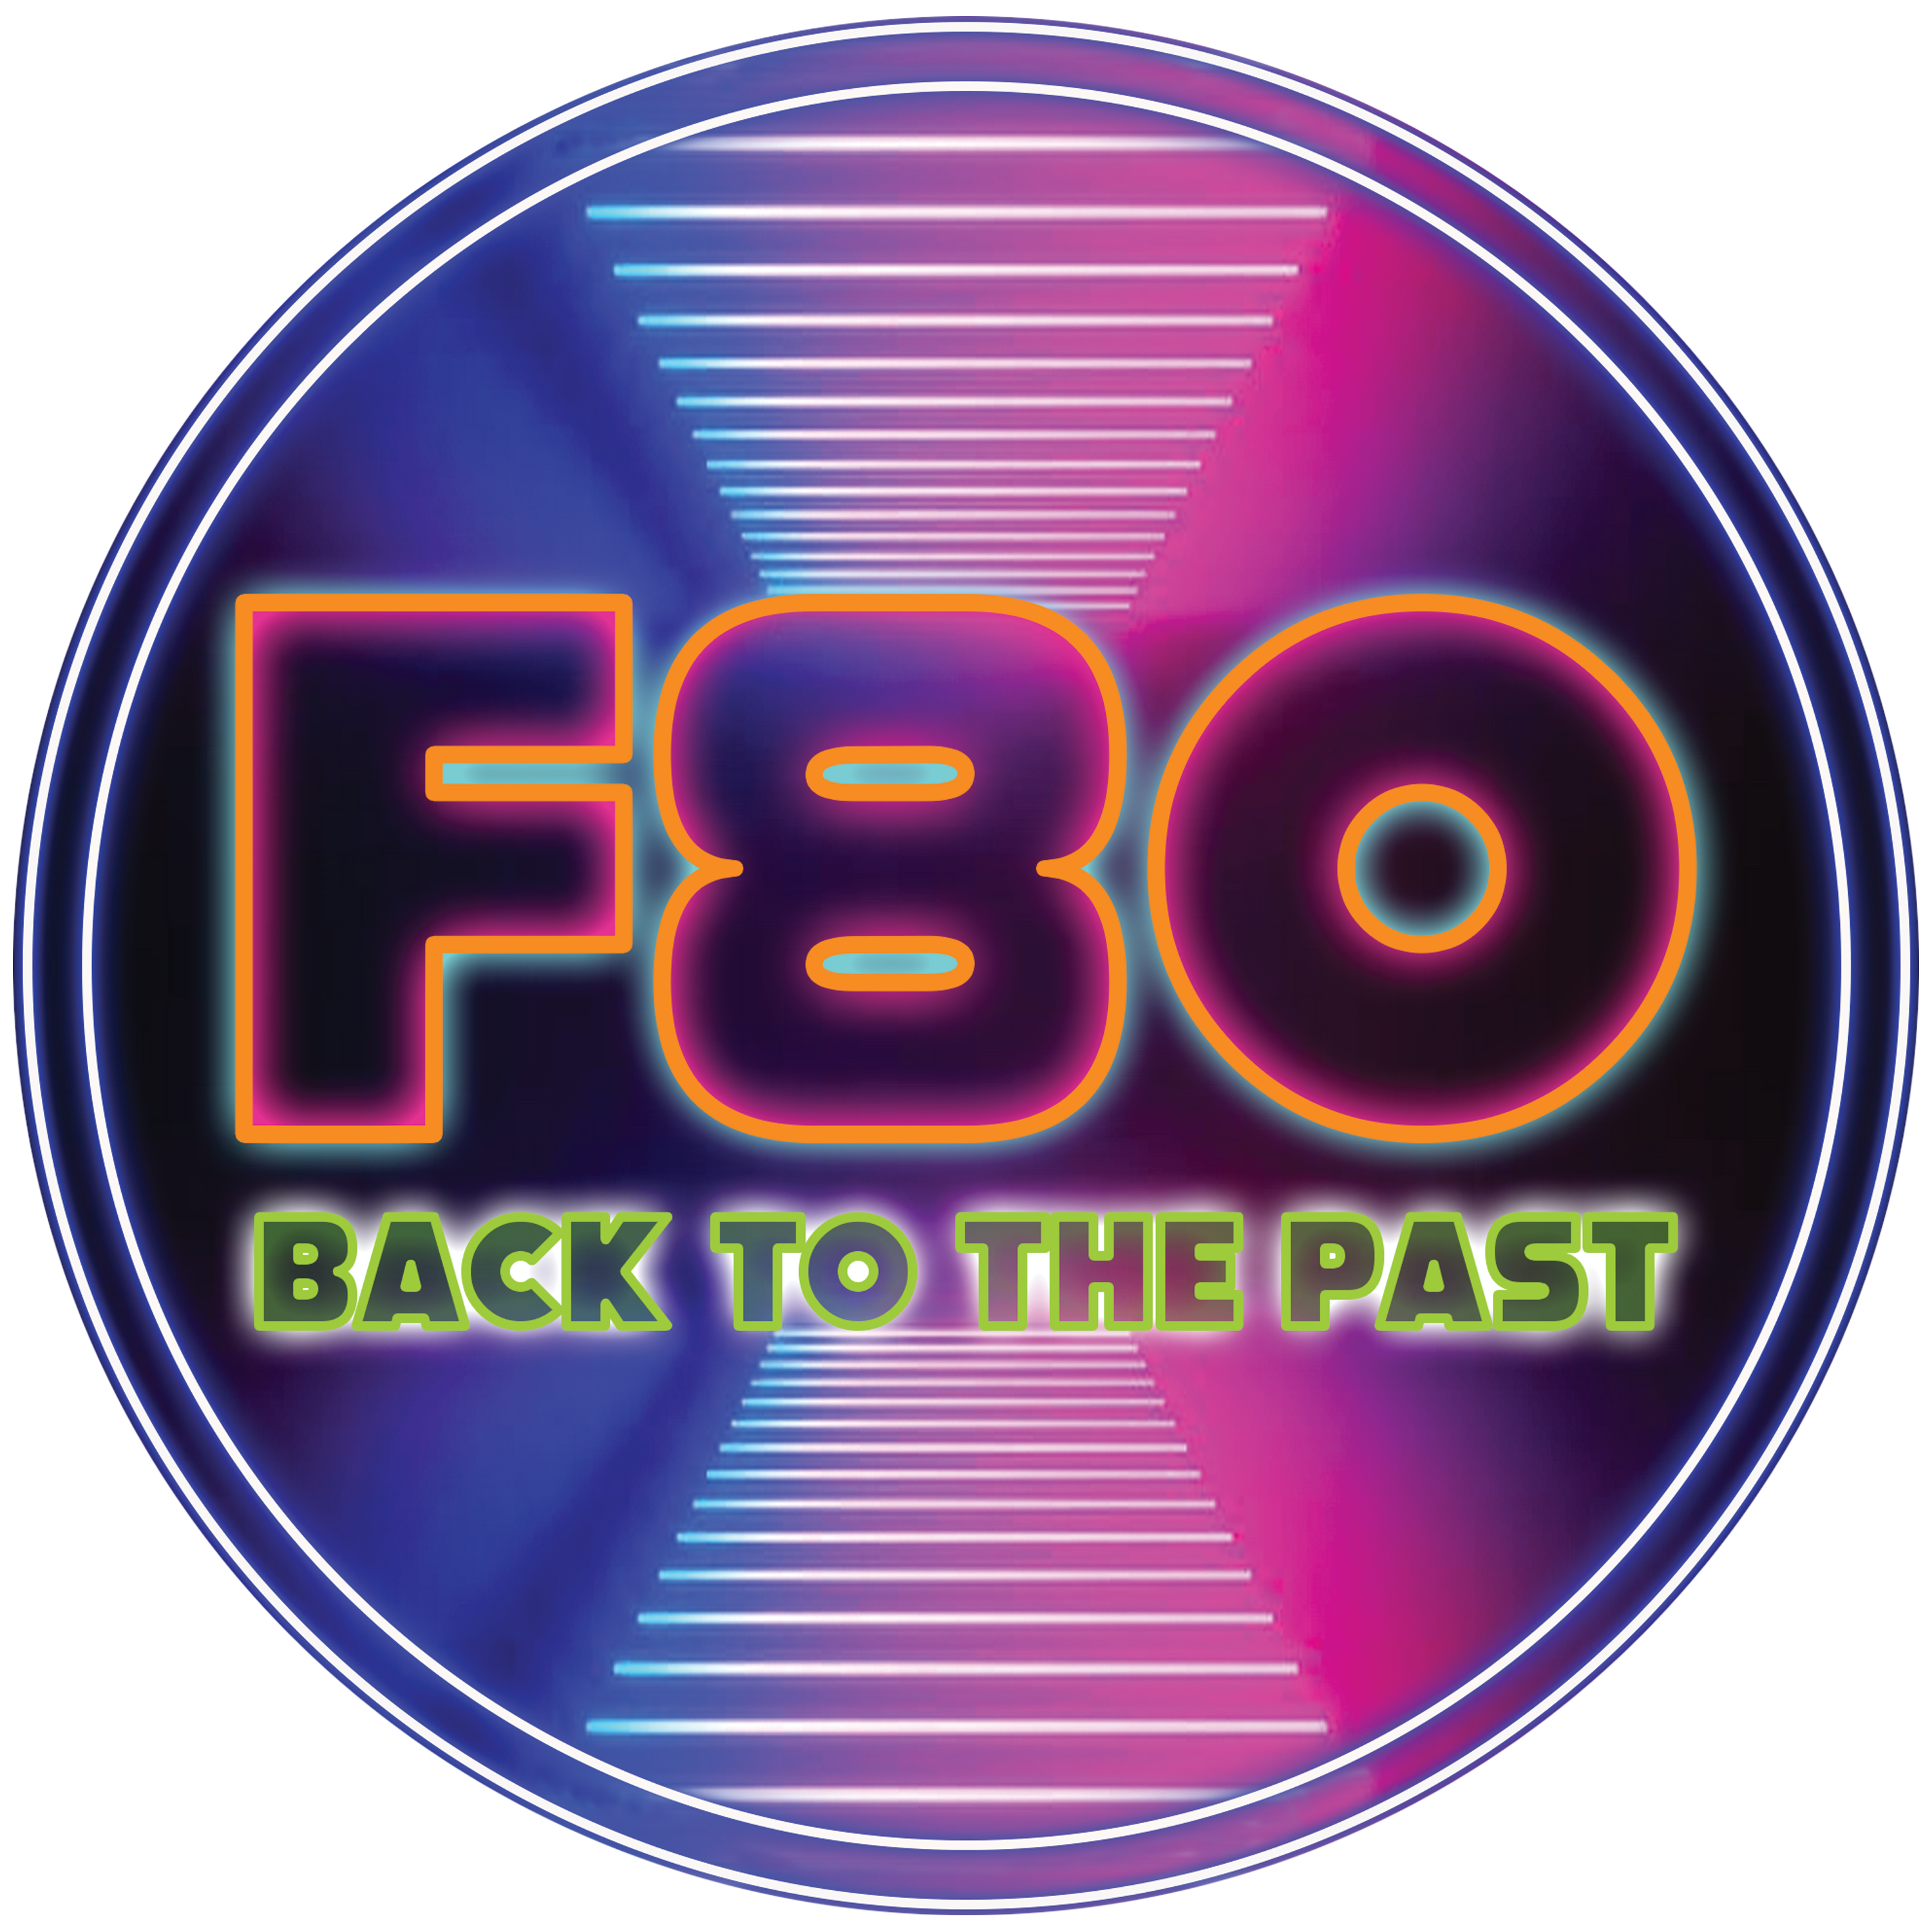 Festival 80 - back to the past - Logo ufficiale